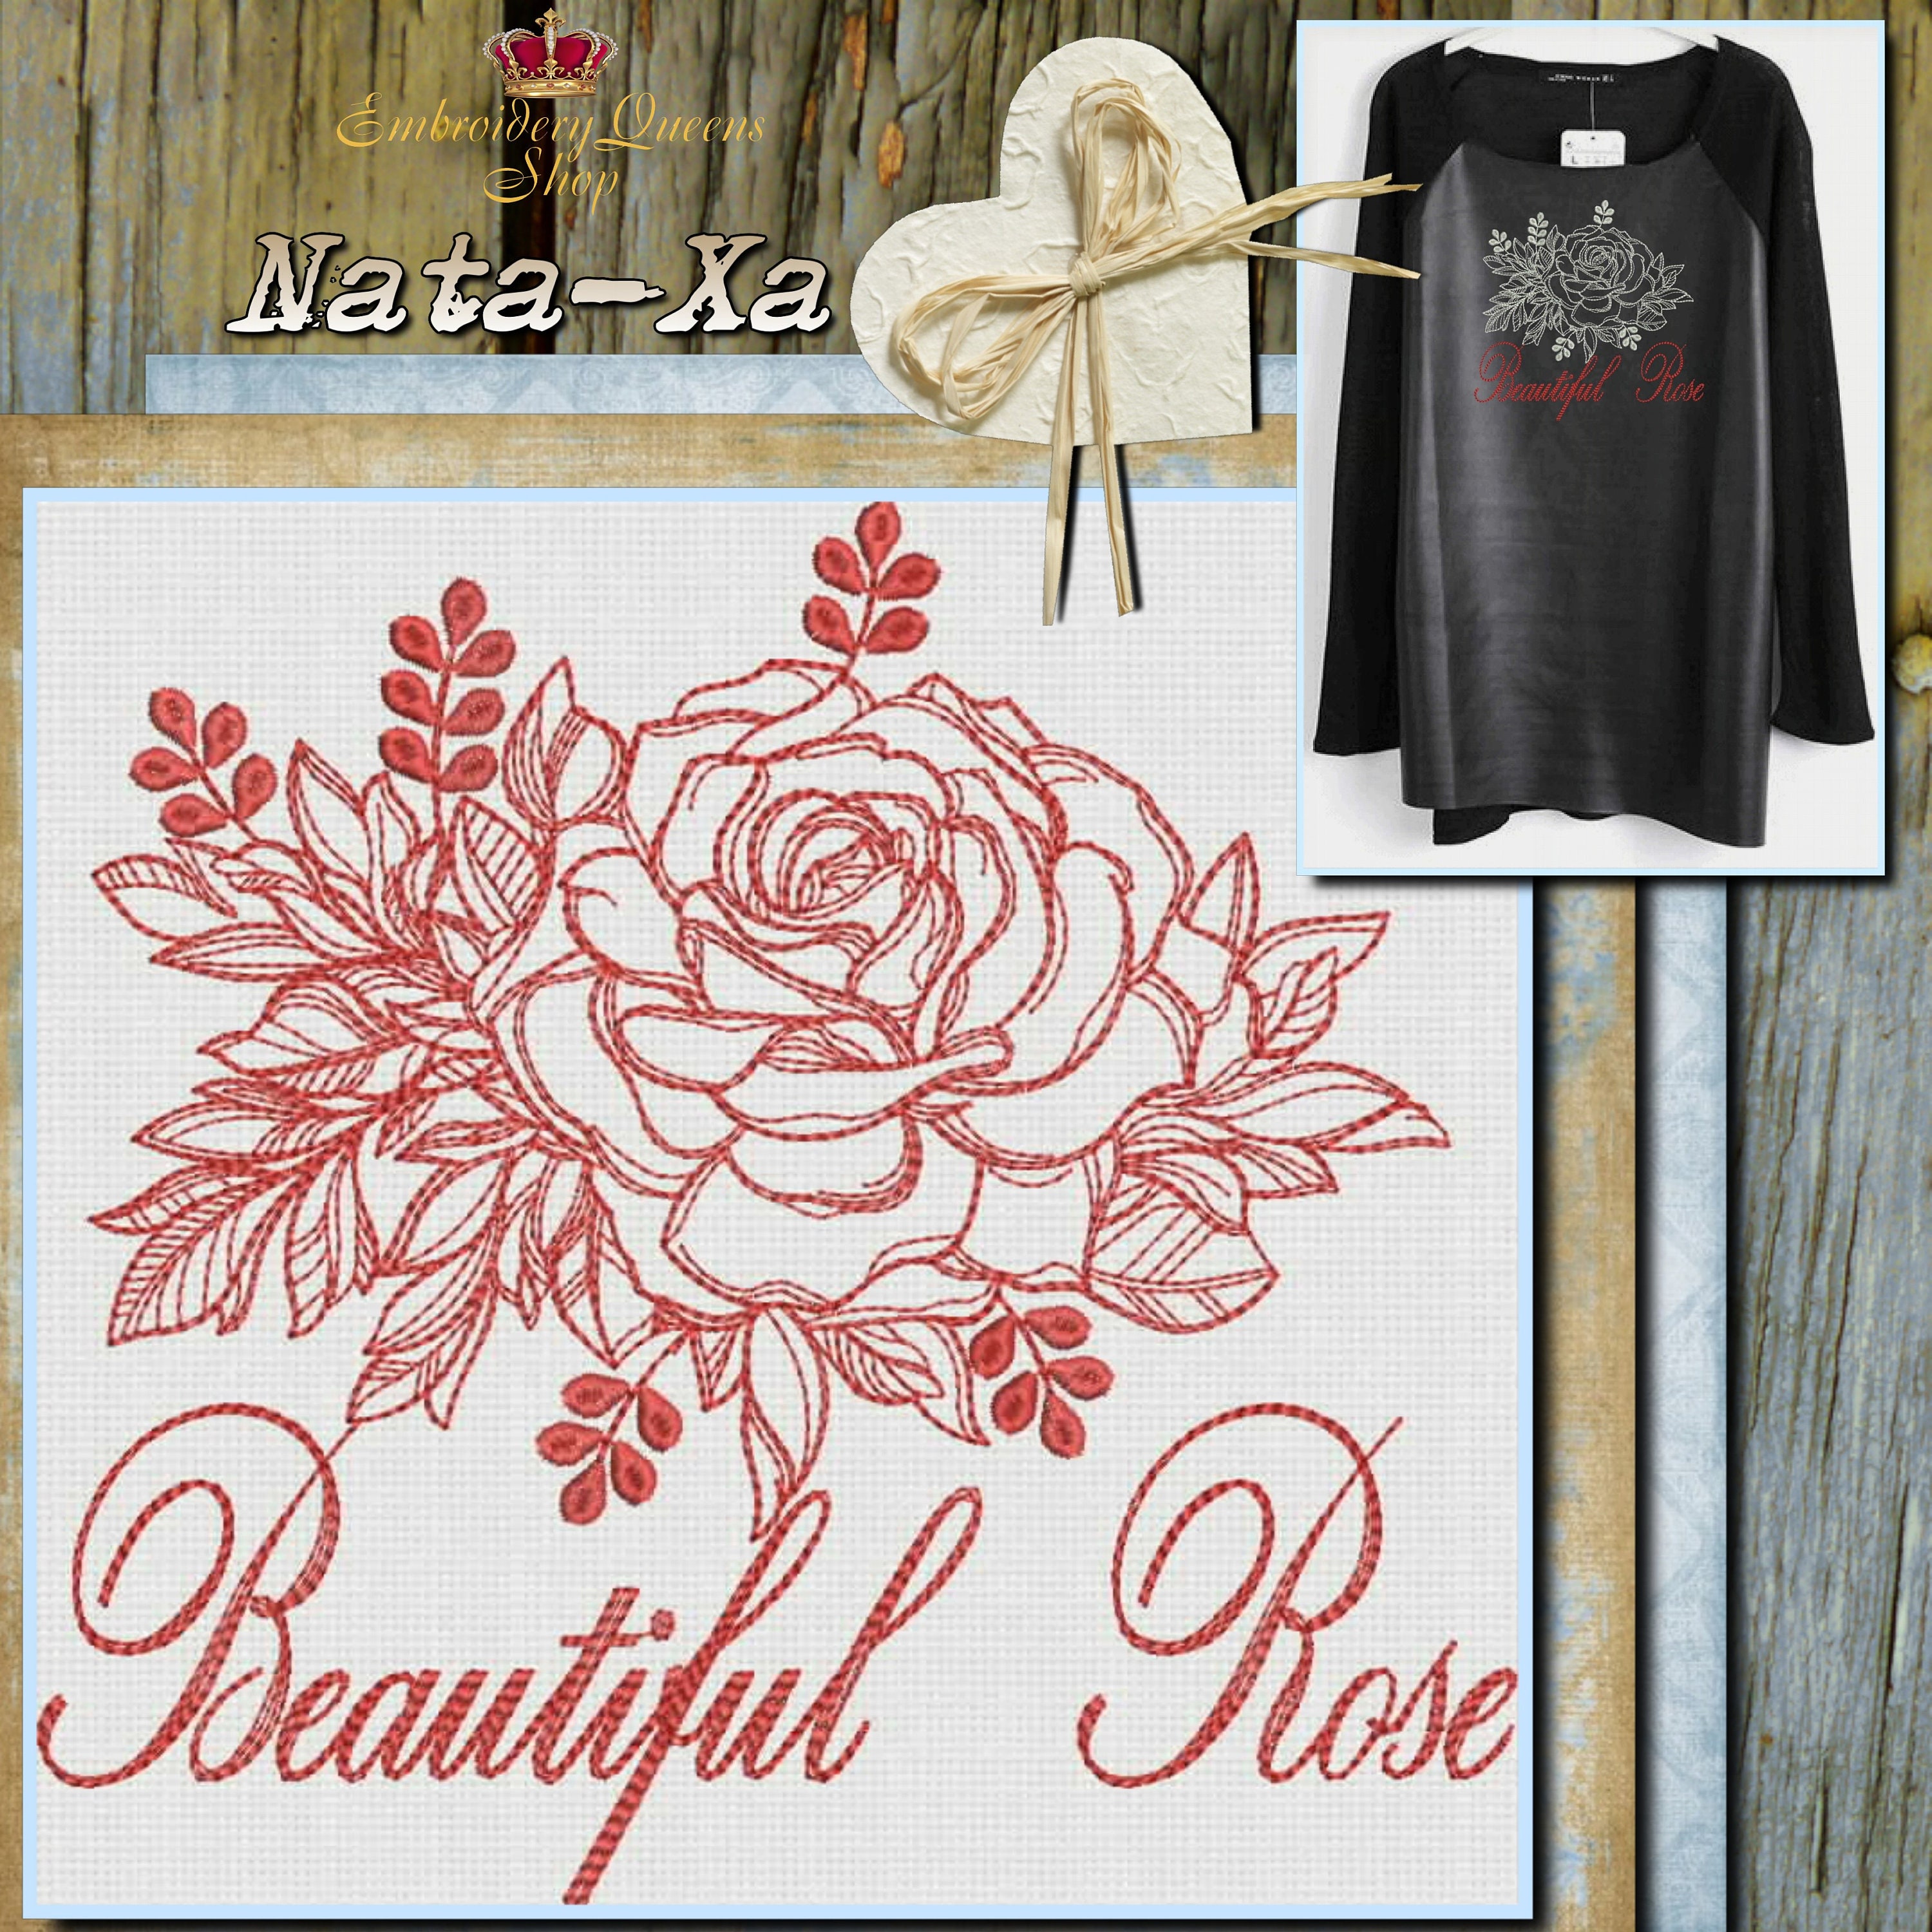 Soft Rose Flower Embroidered Tattoo Practice Set For Beginners